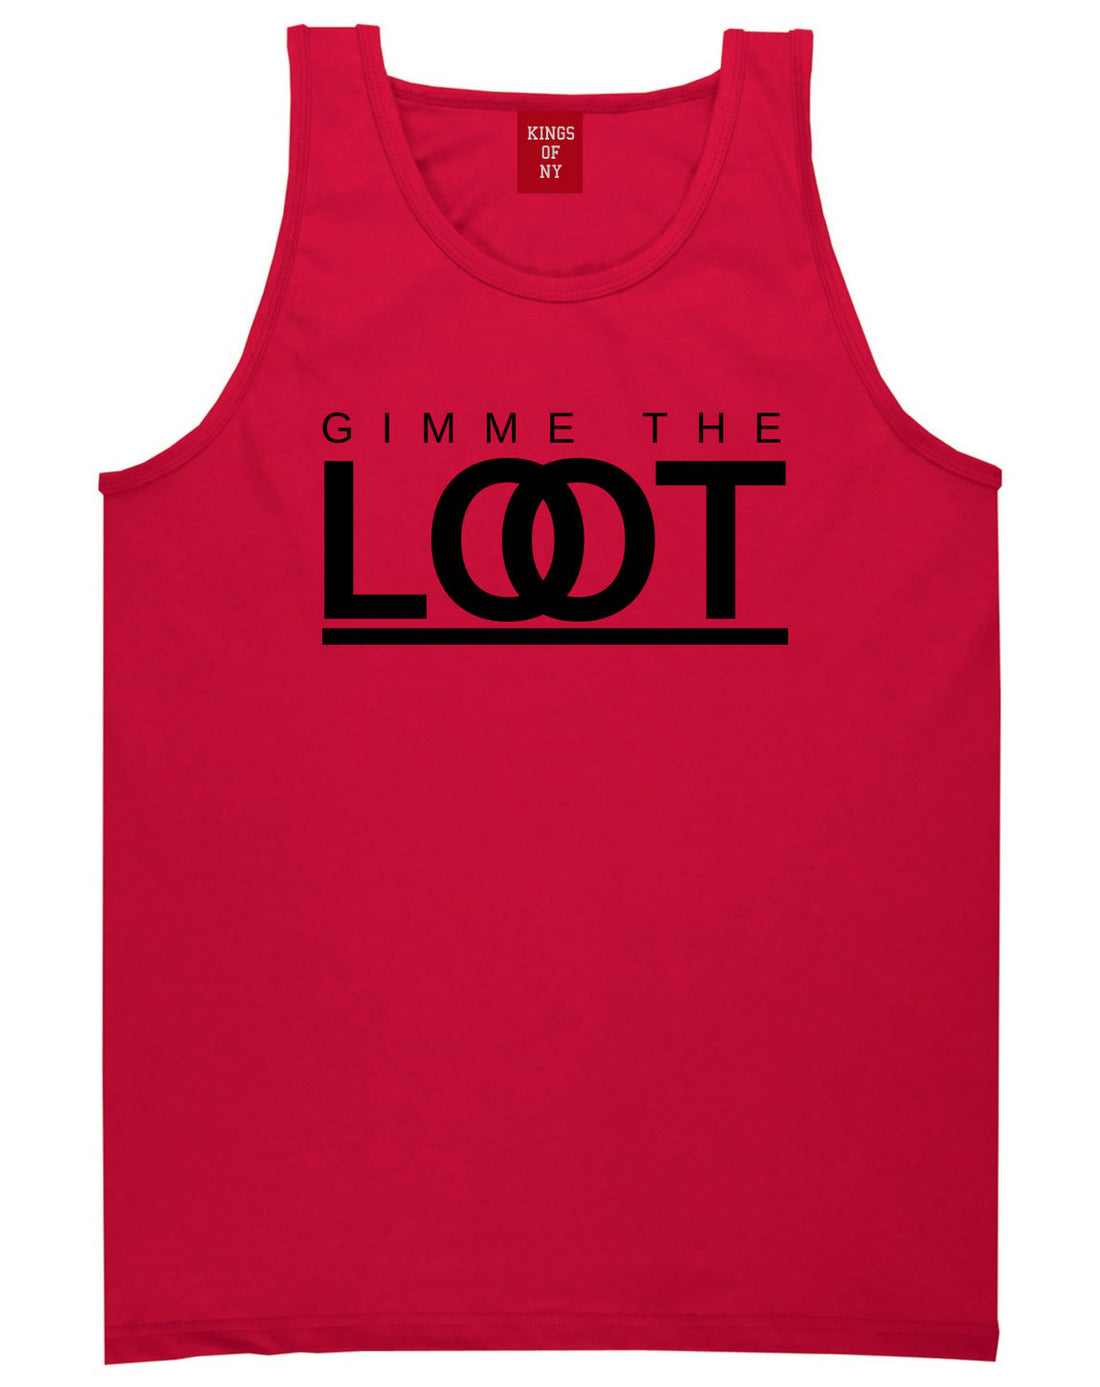 Gimme The Loot  Tank Top in Red By Kings Of NY